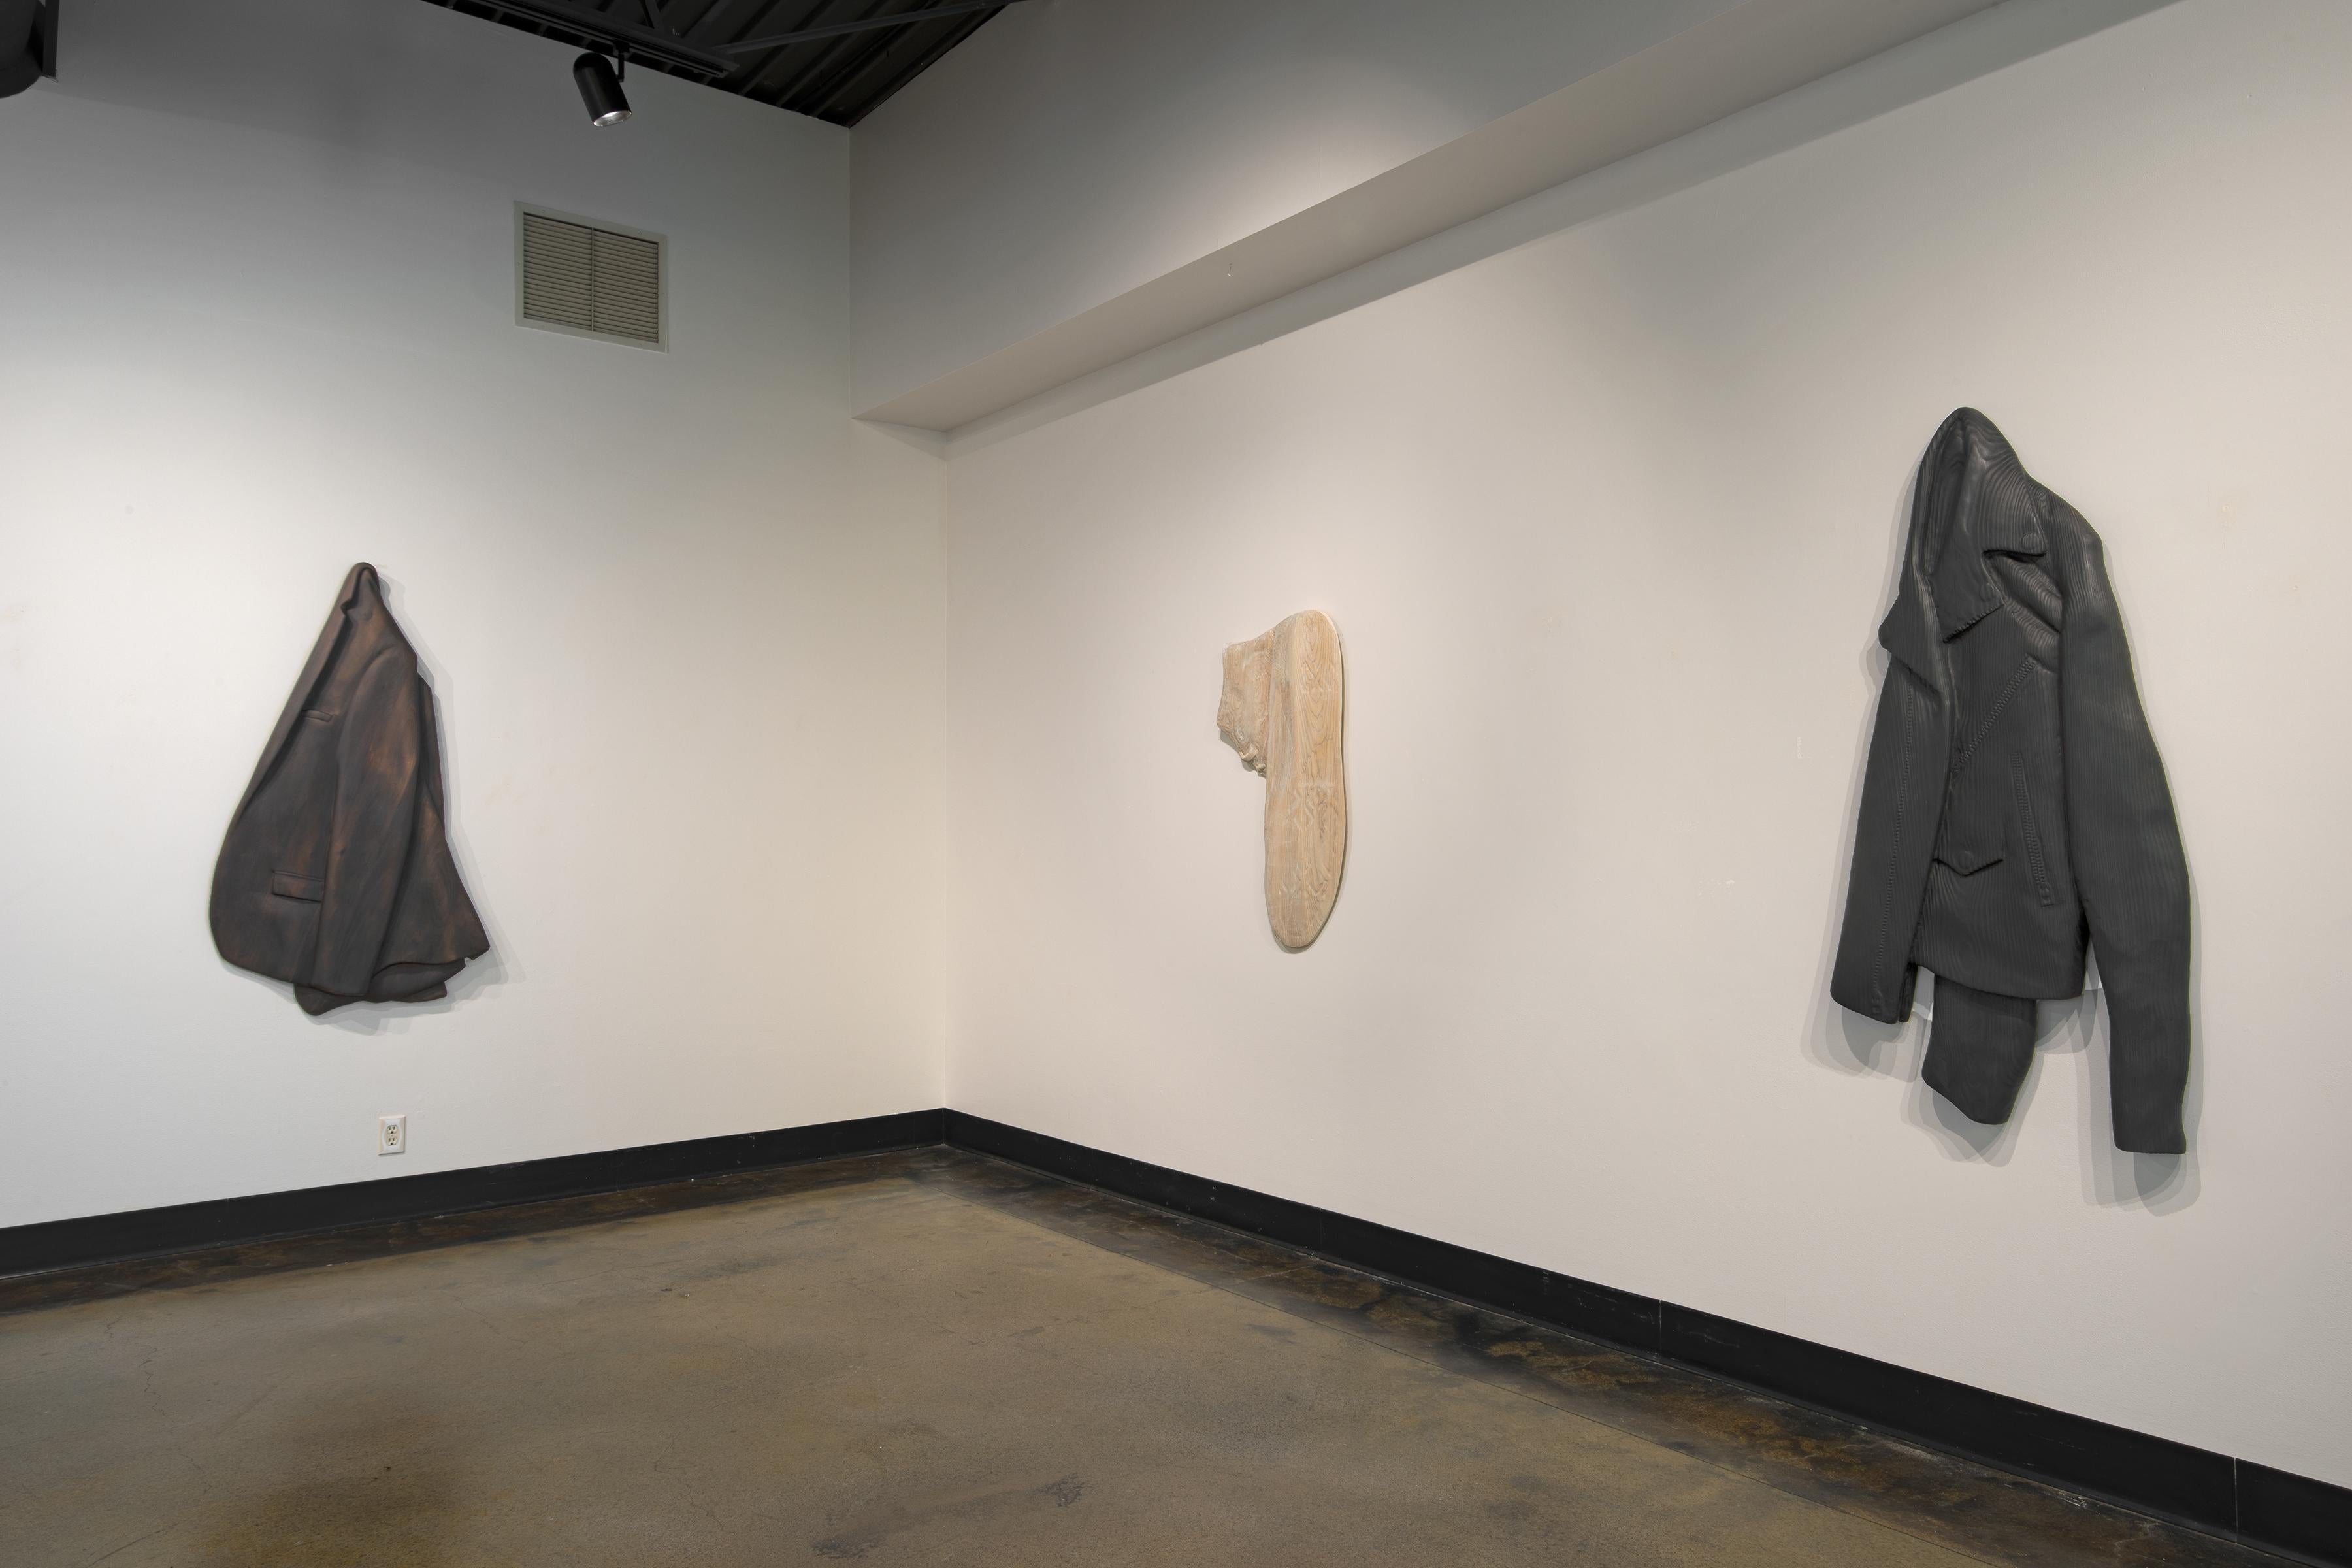 ST.ROPER is a 3D-printed sculpture by Ray Padrón created in 2016. The piece belongs to a series of work centering around clothing items and their relation to people in the artist’s life. Uniquely to other, wood carved pieces in the series, the